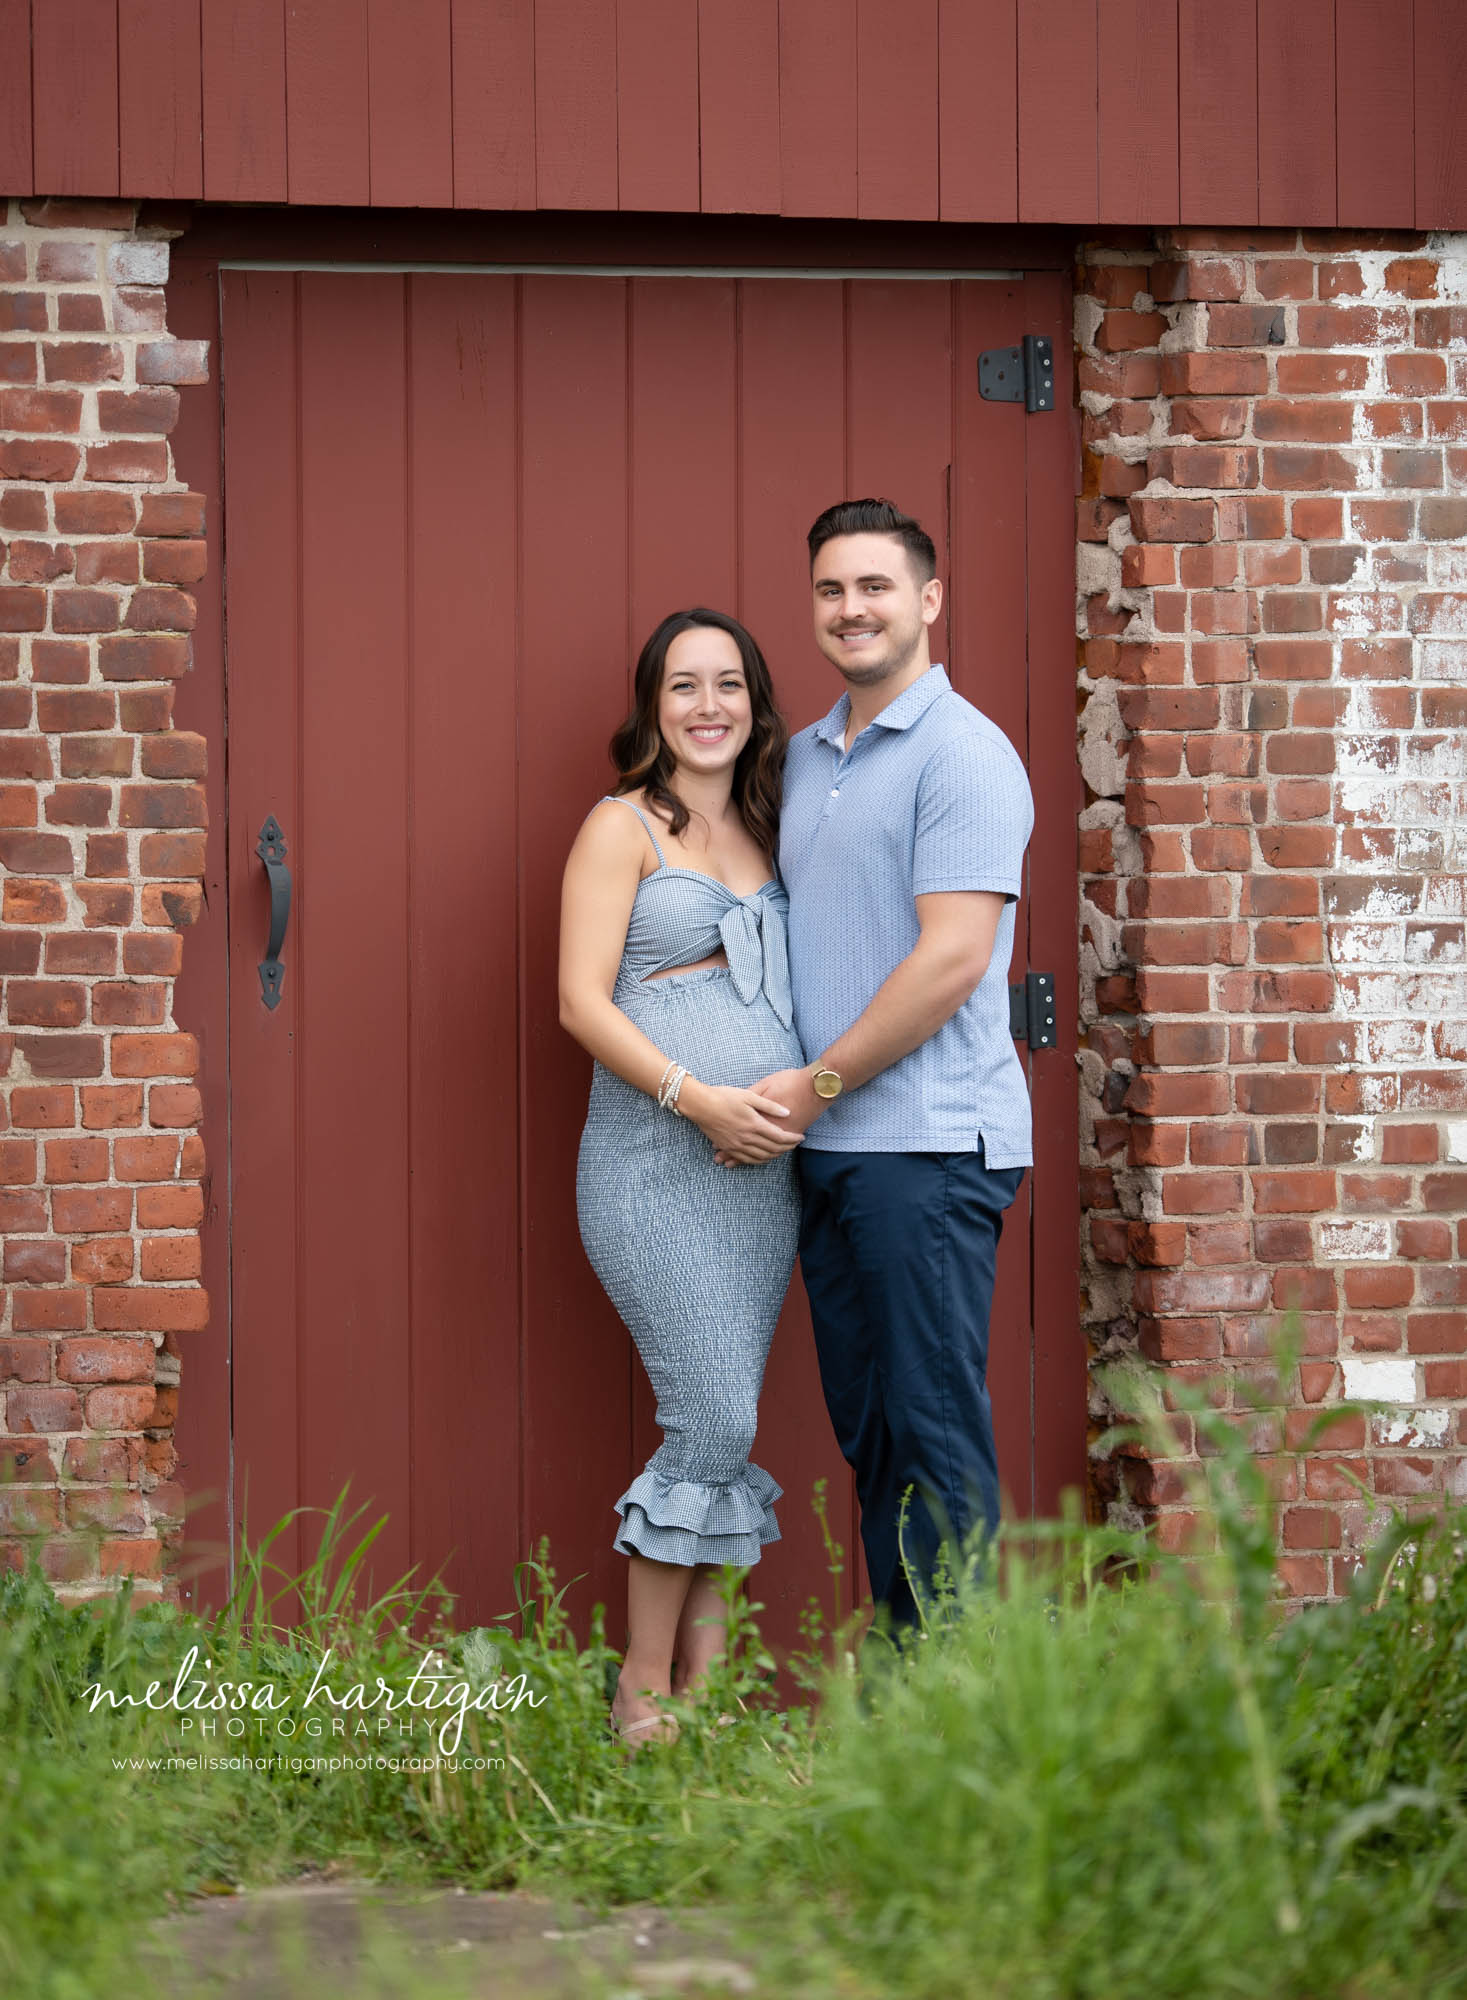 expectant couple standing next to red door on building maternity picture